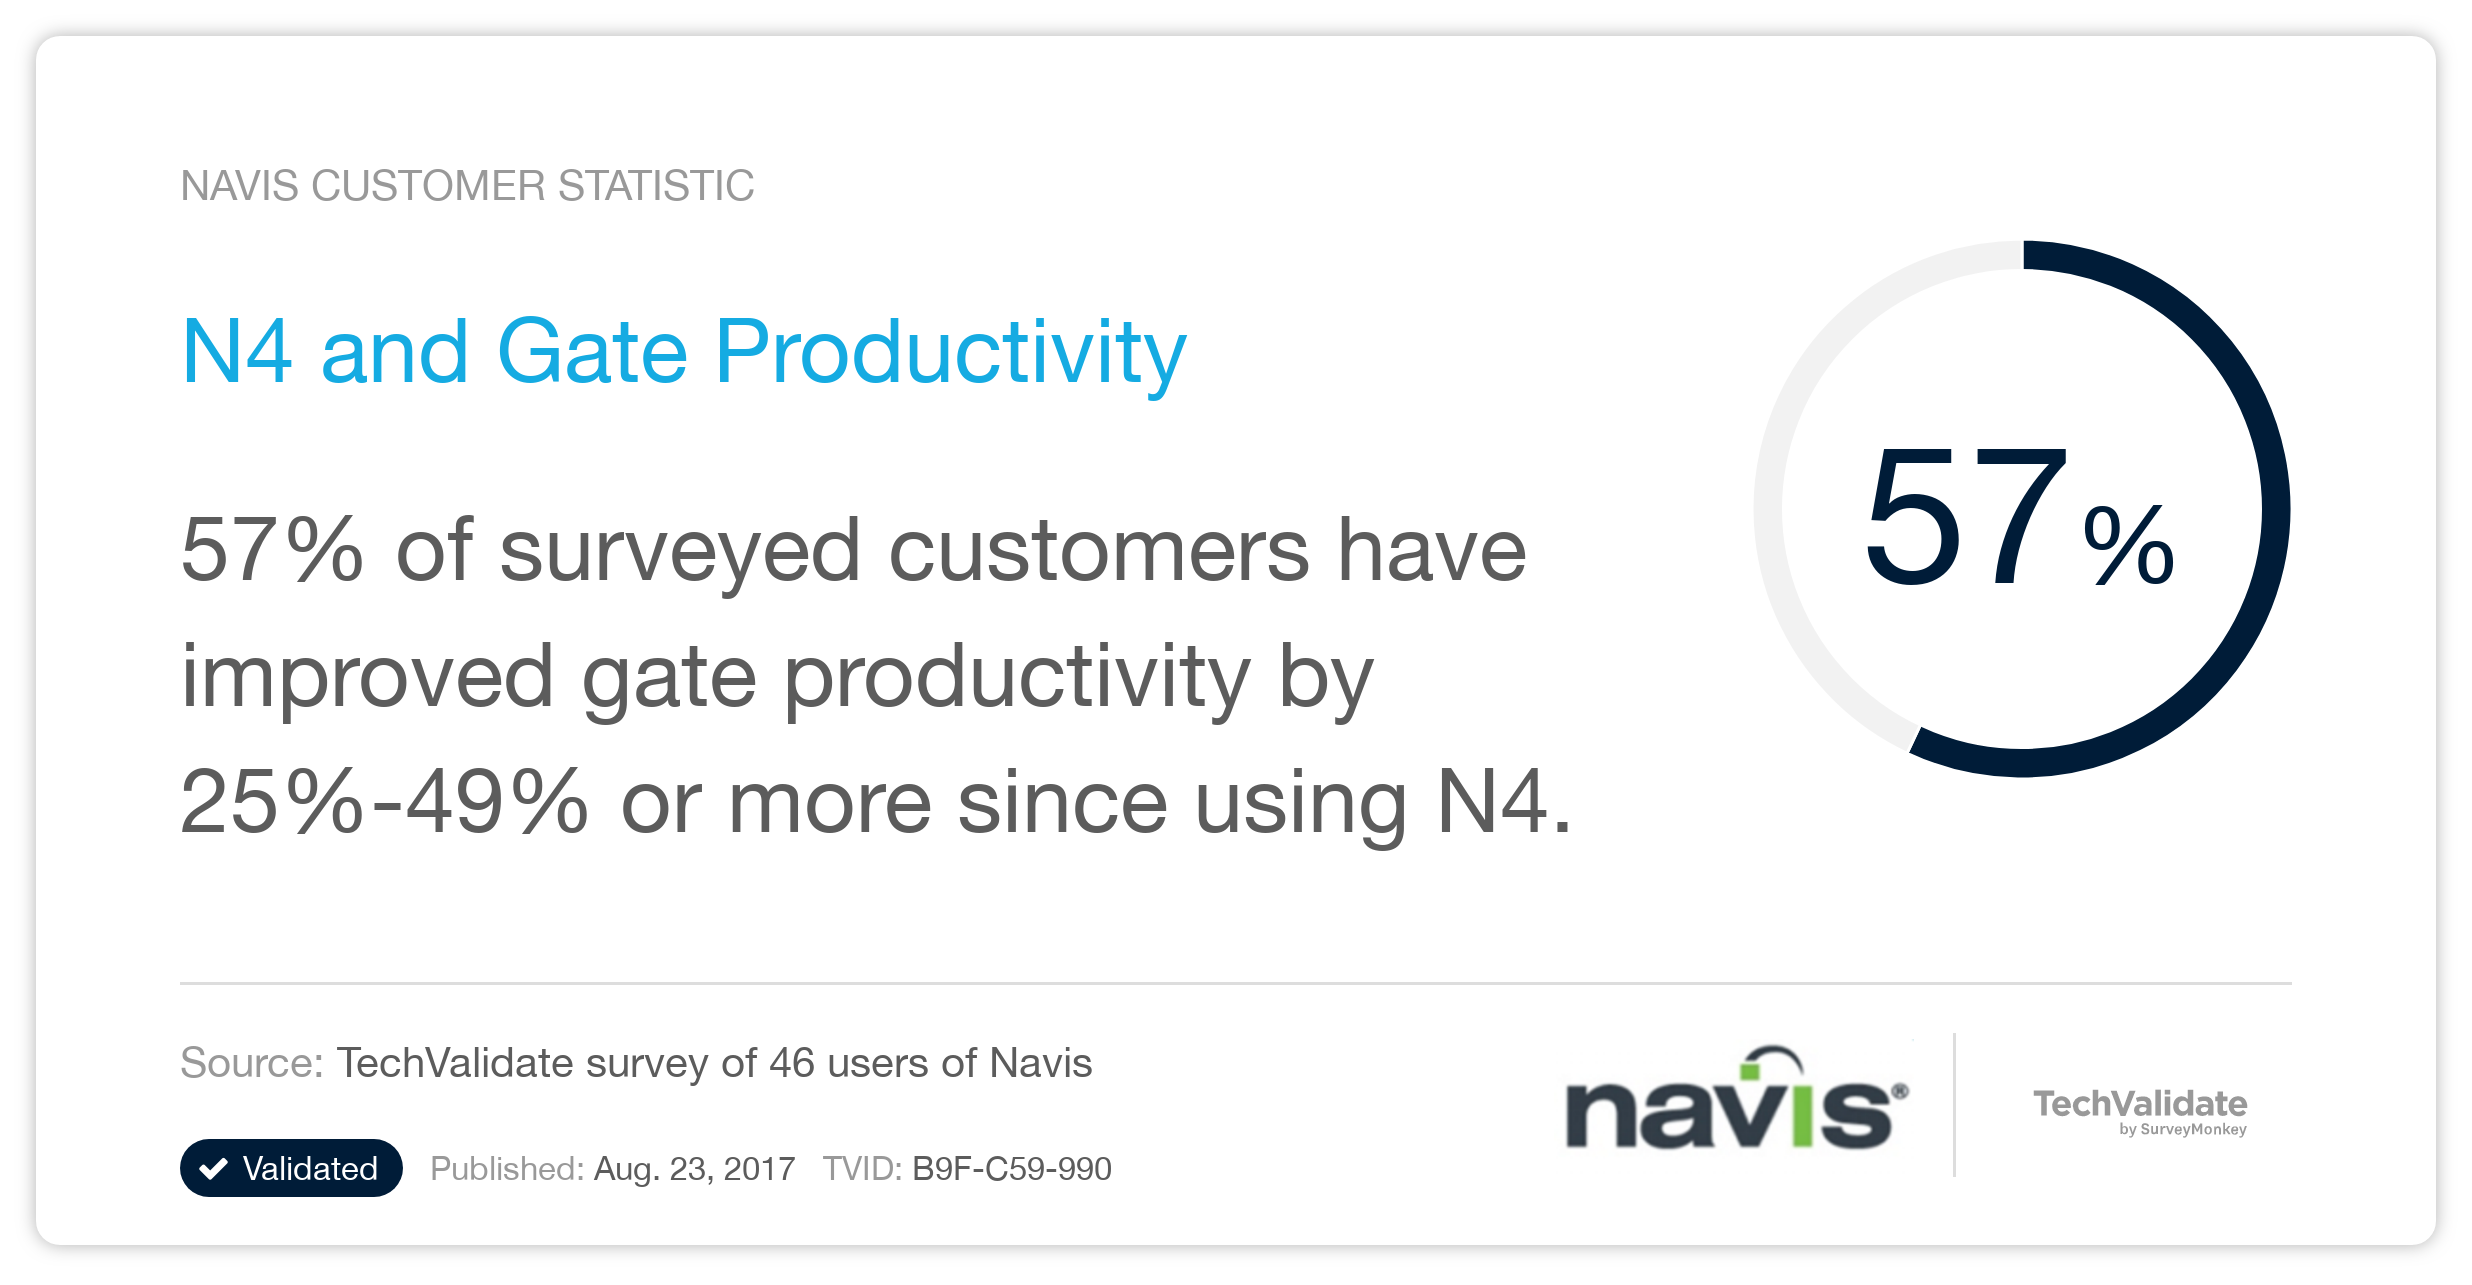 N4 and Gate Productivity